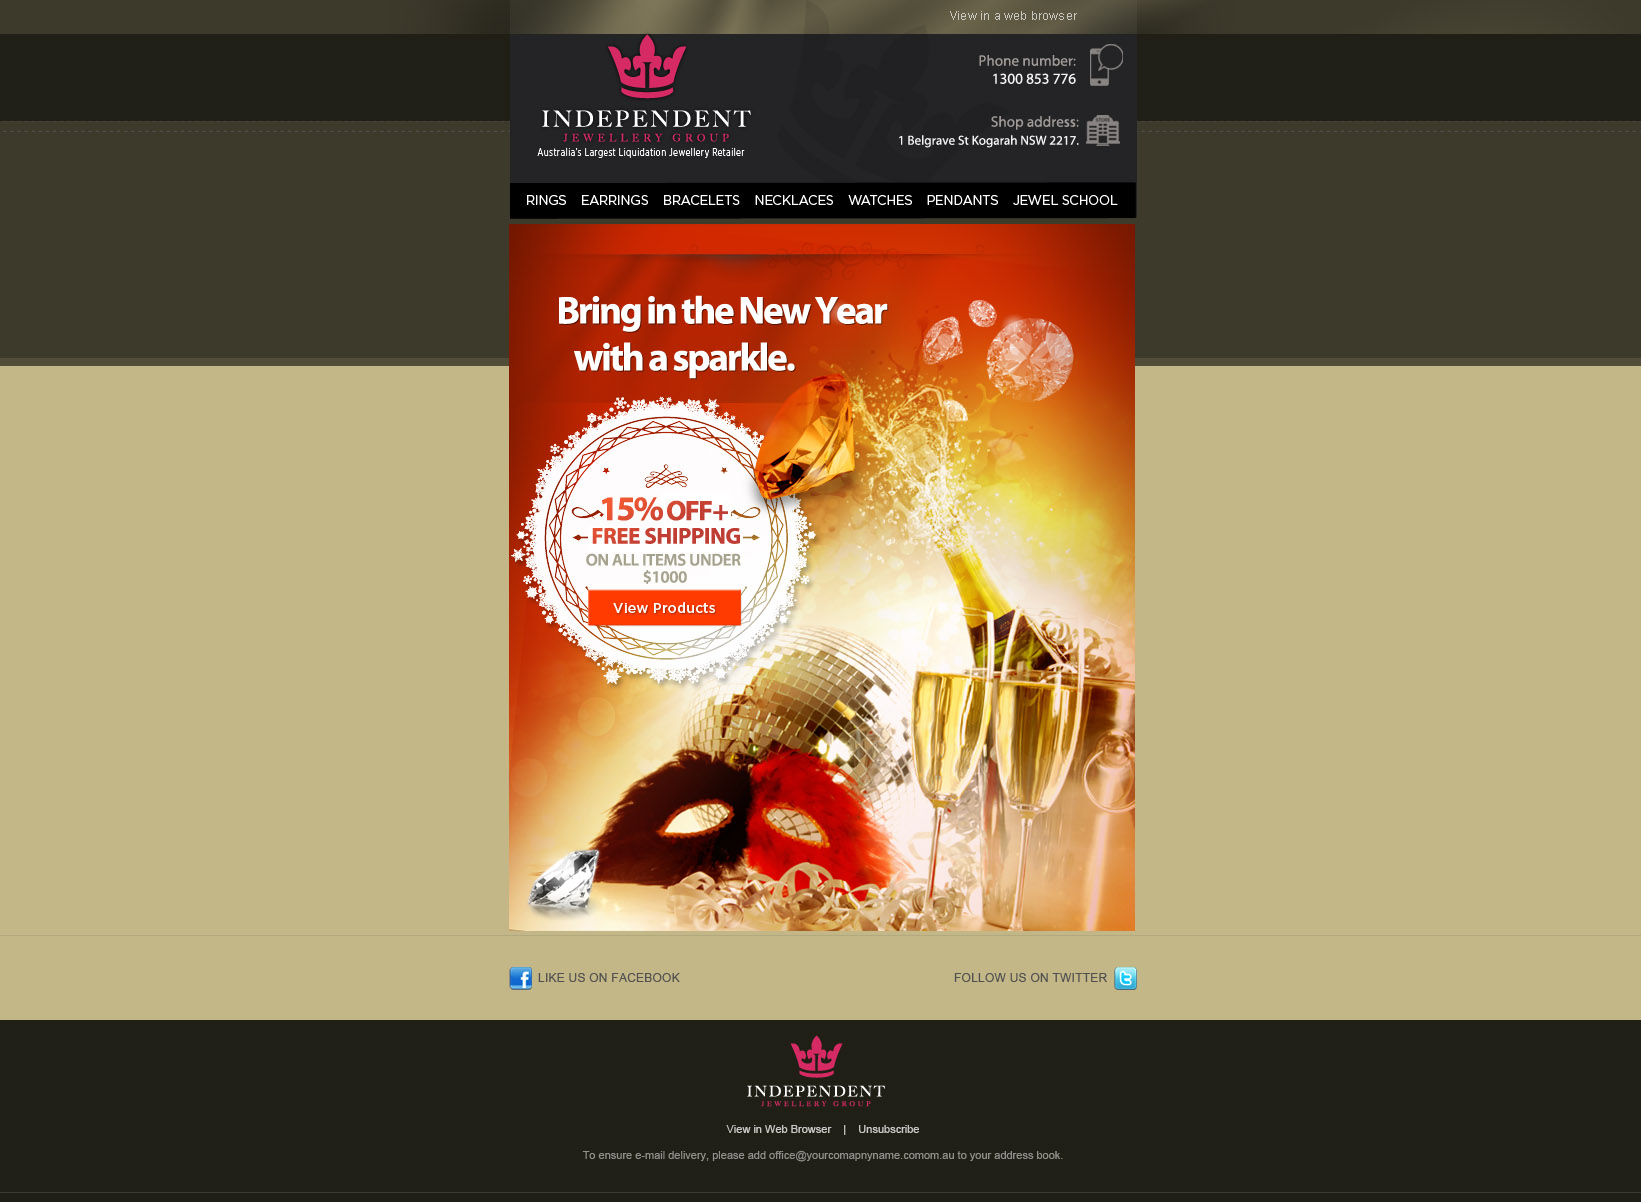 INDEPENDENT JEWELLERY GROUP - NEWSLETTER